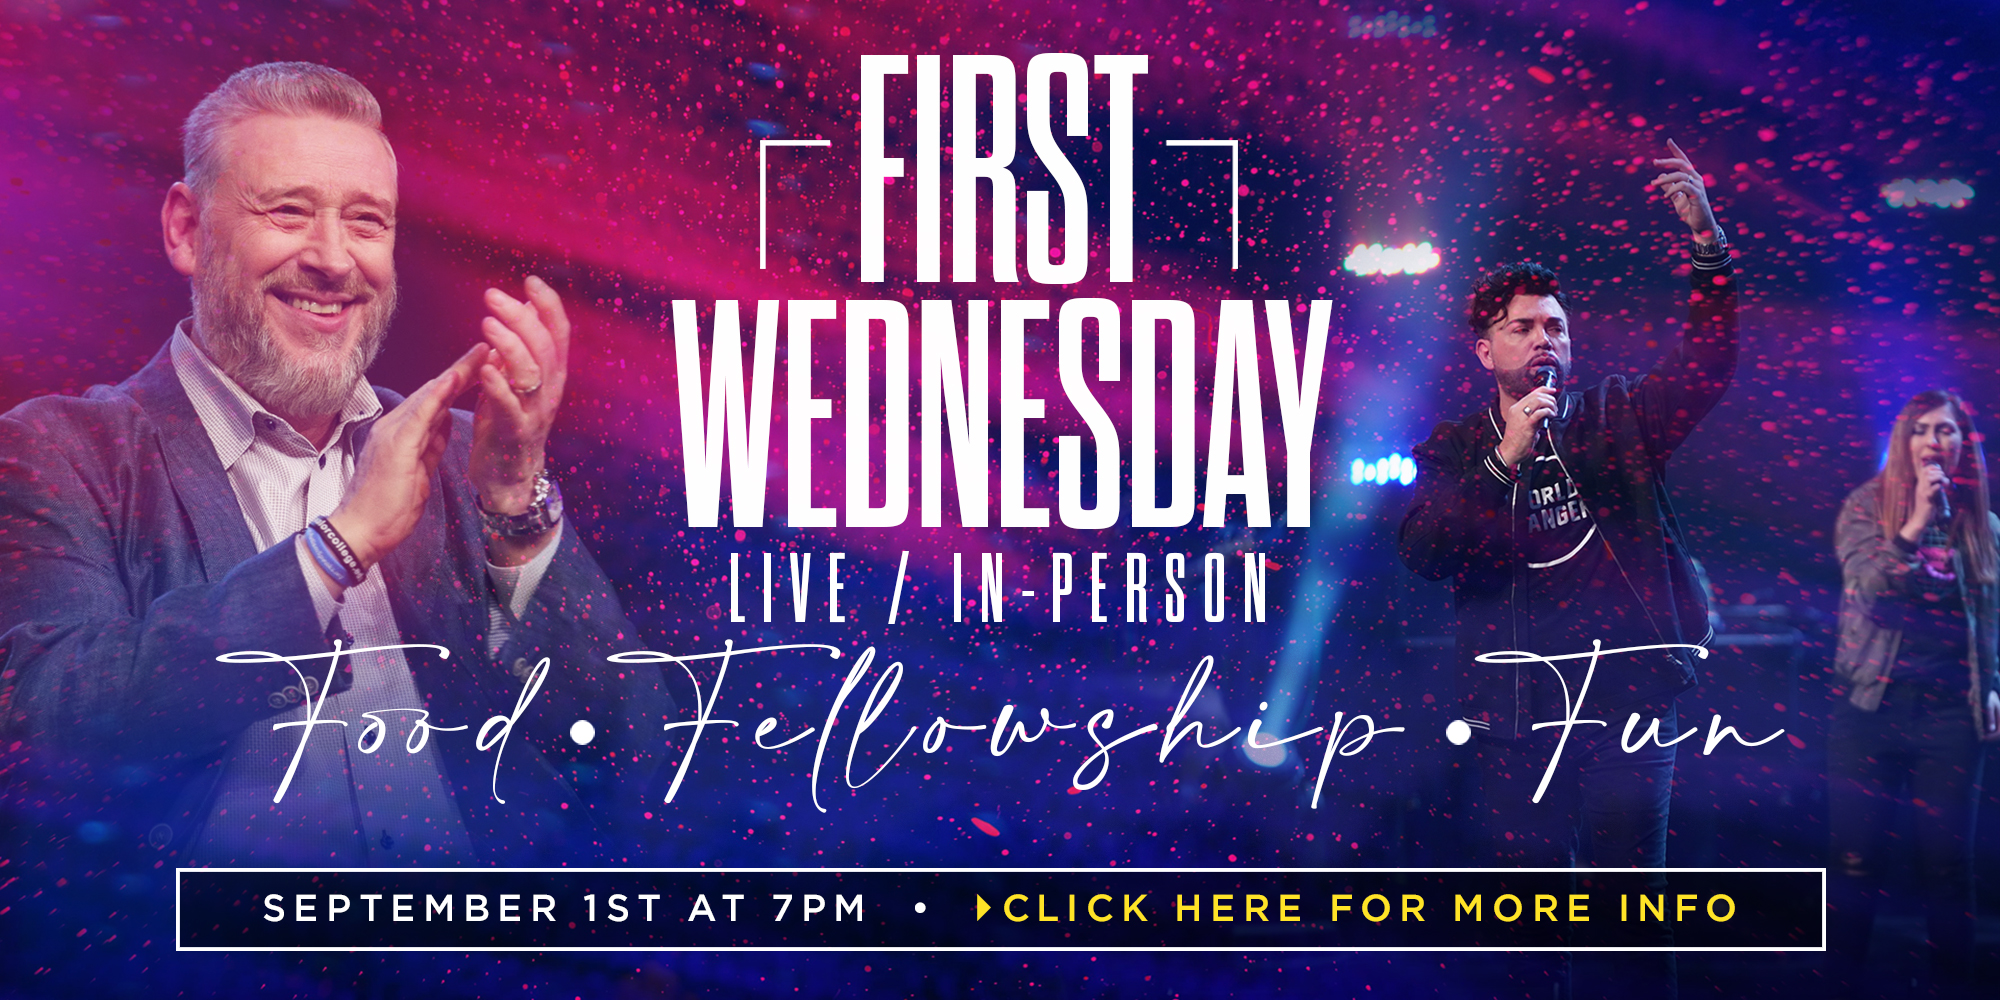 First Wednesday Live In-person Food Fellowship Fun Beginning August 4th